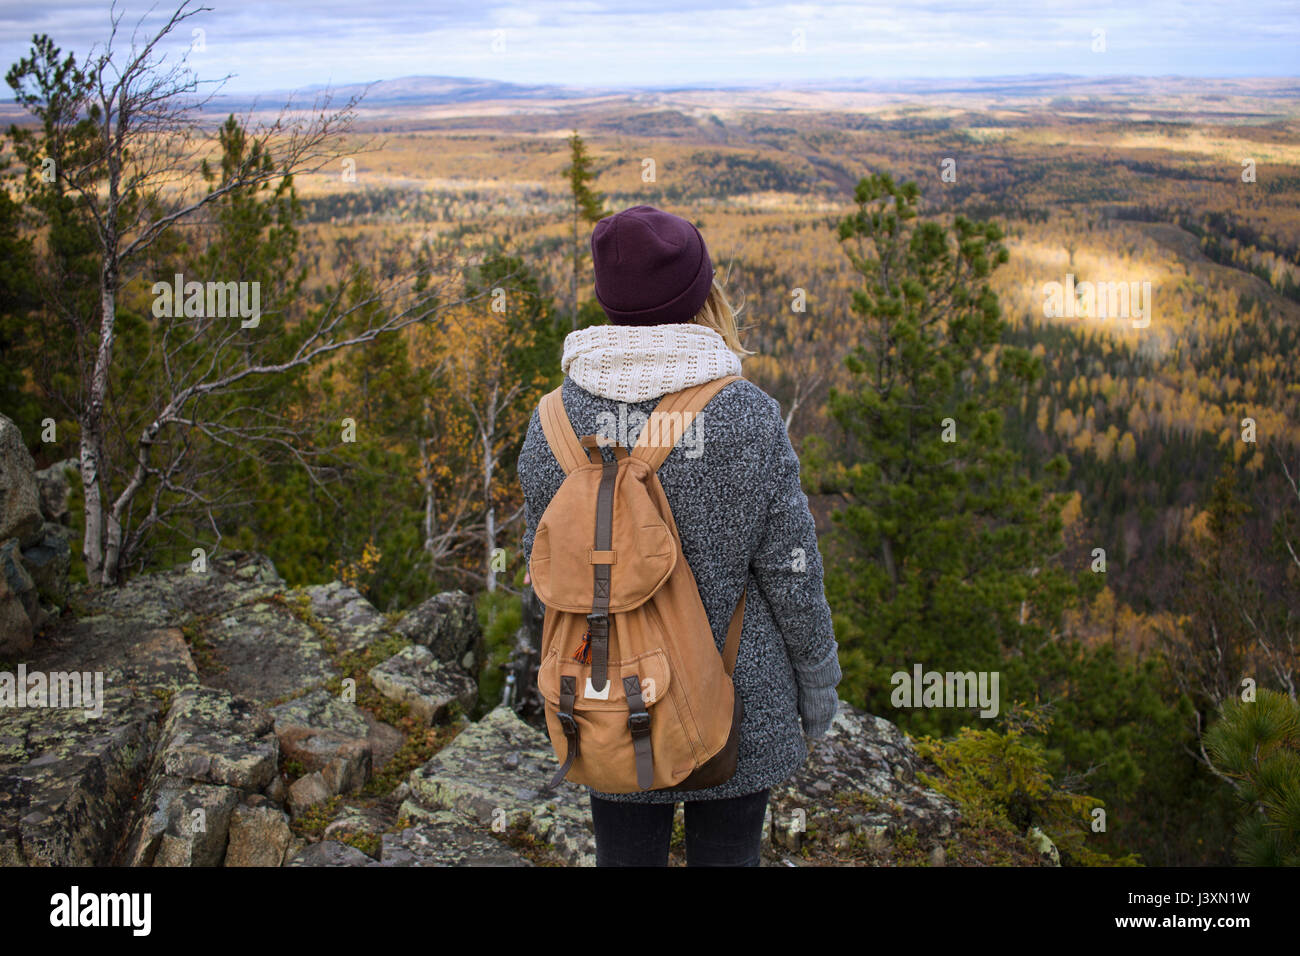 Young woman standing on mountainside, looking at view, Sverdlovsk Oblast, Russia Stock Photo